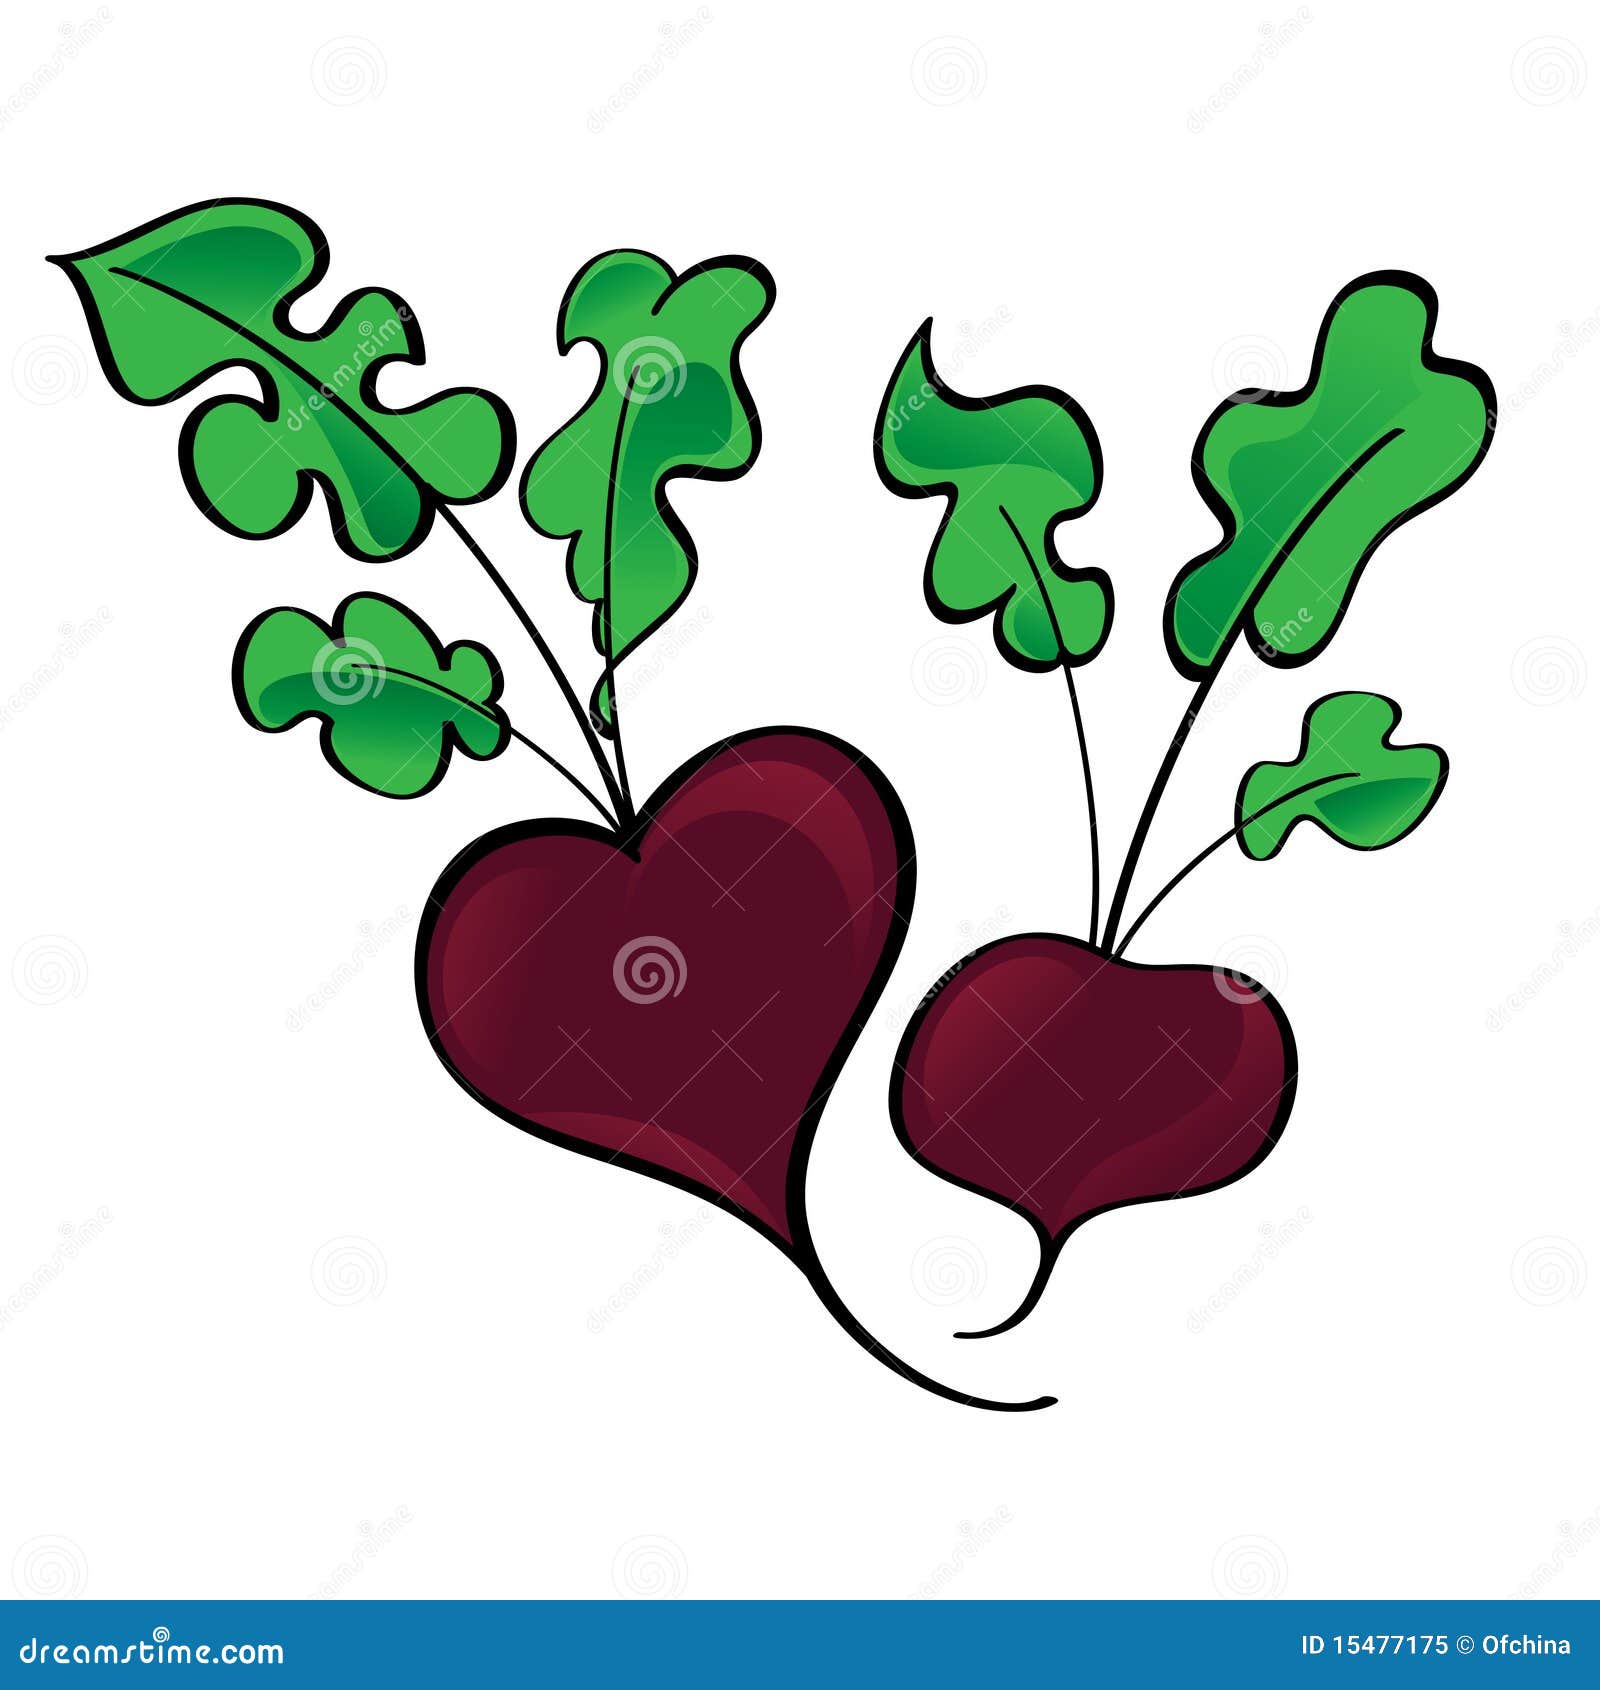 free clipart beets - photo #29